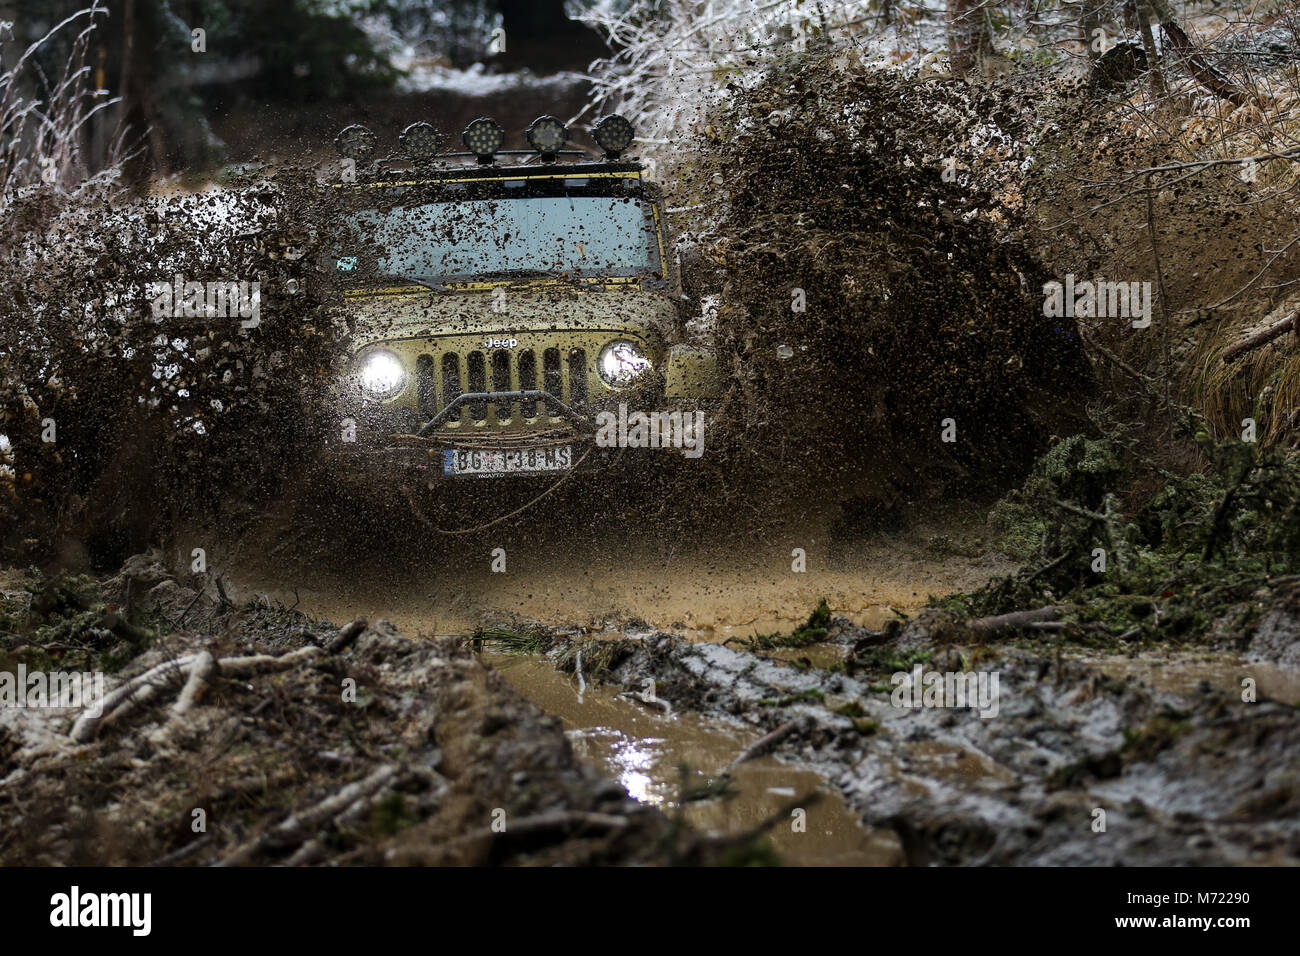 Jeep driving offroad Stock Photo